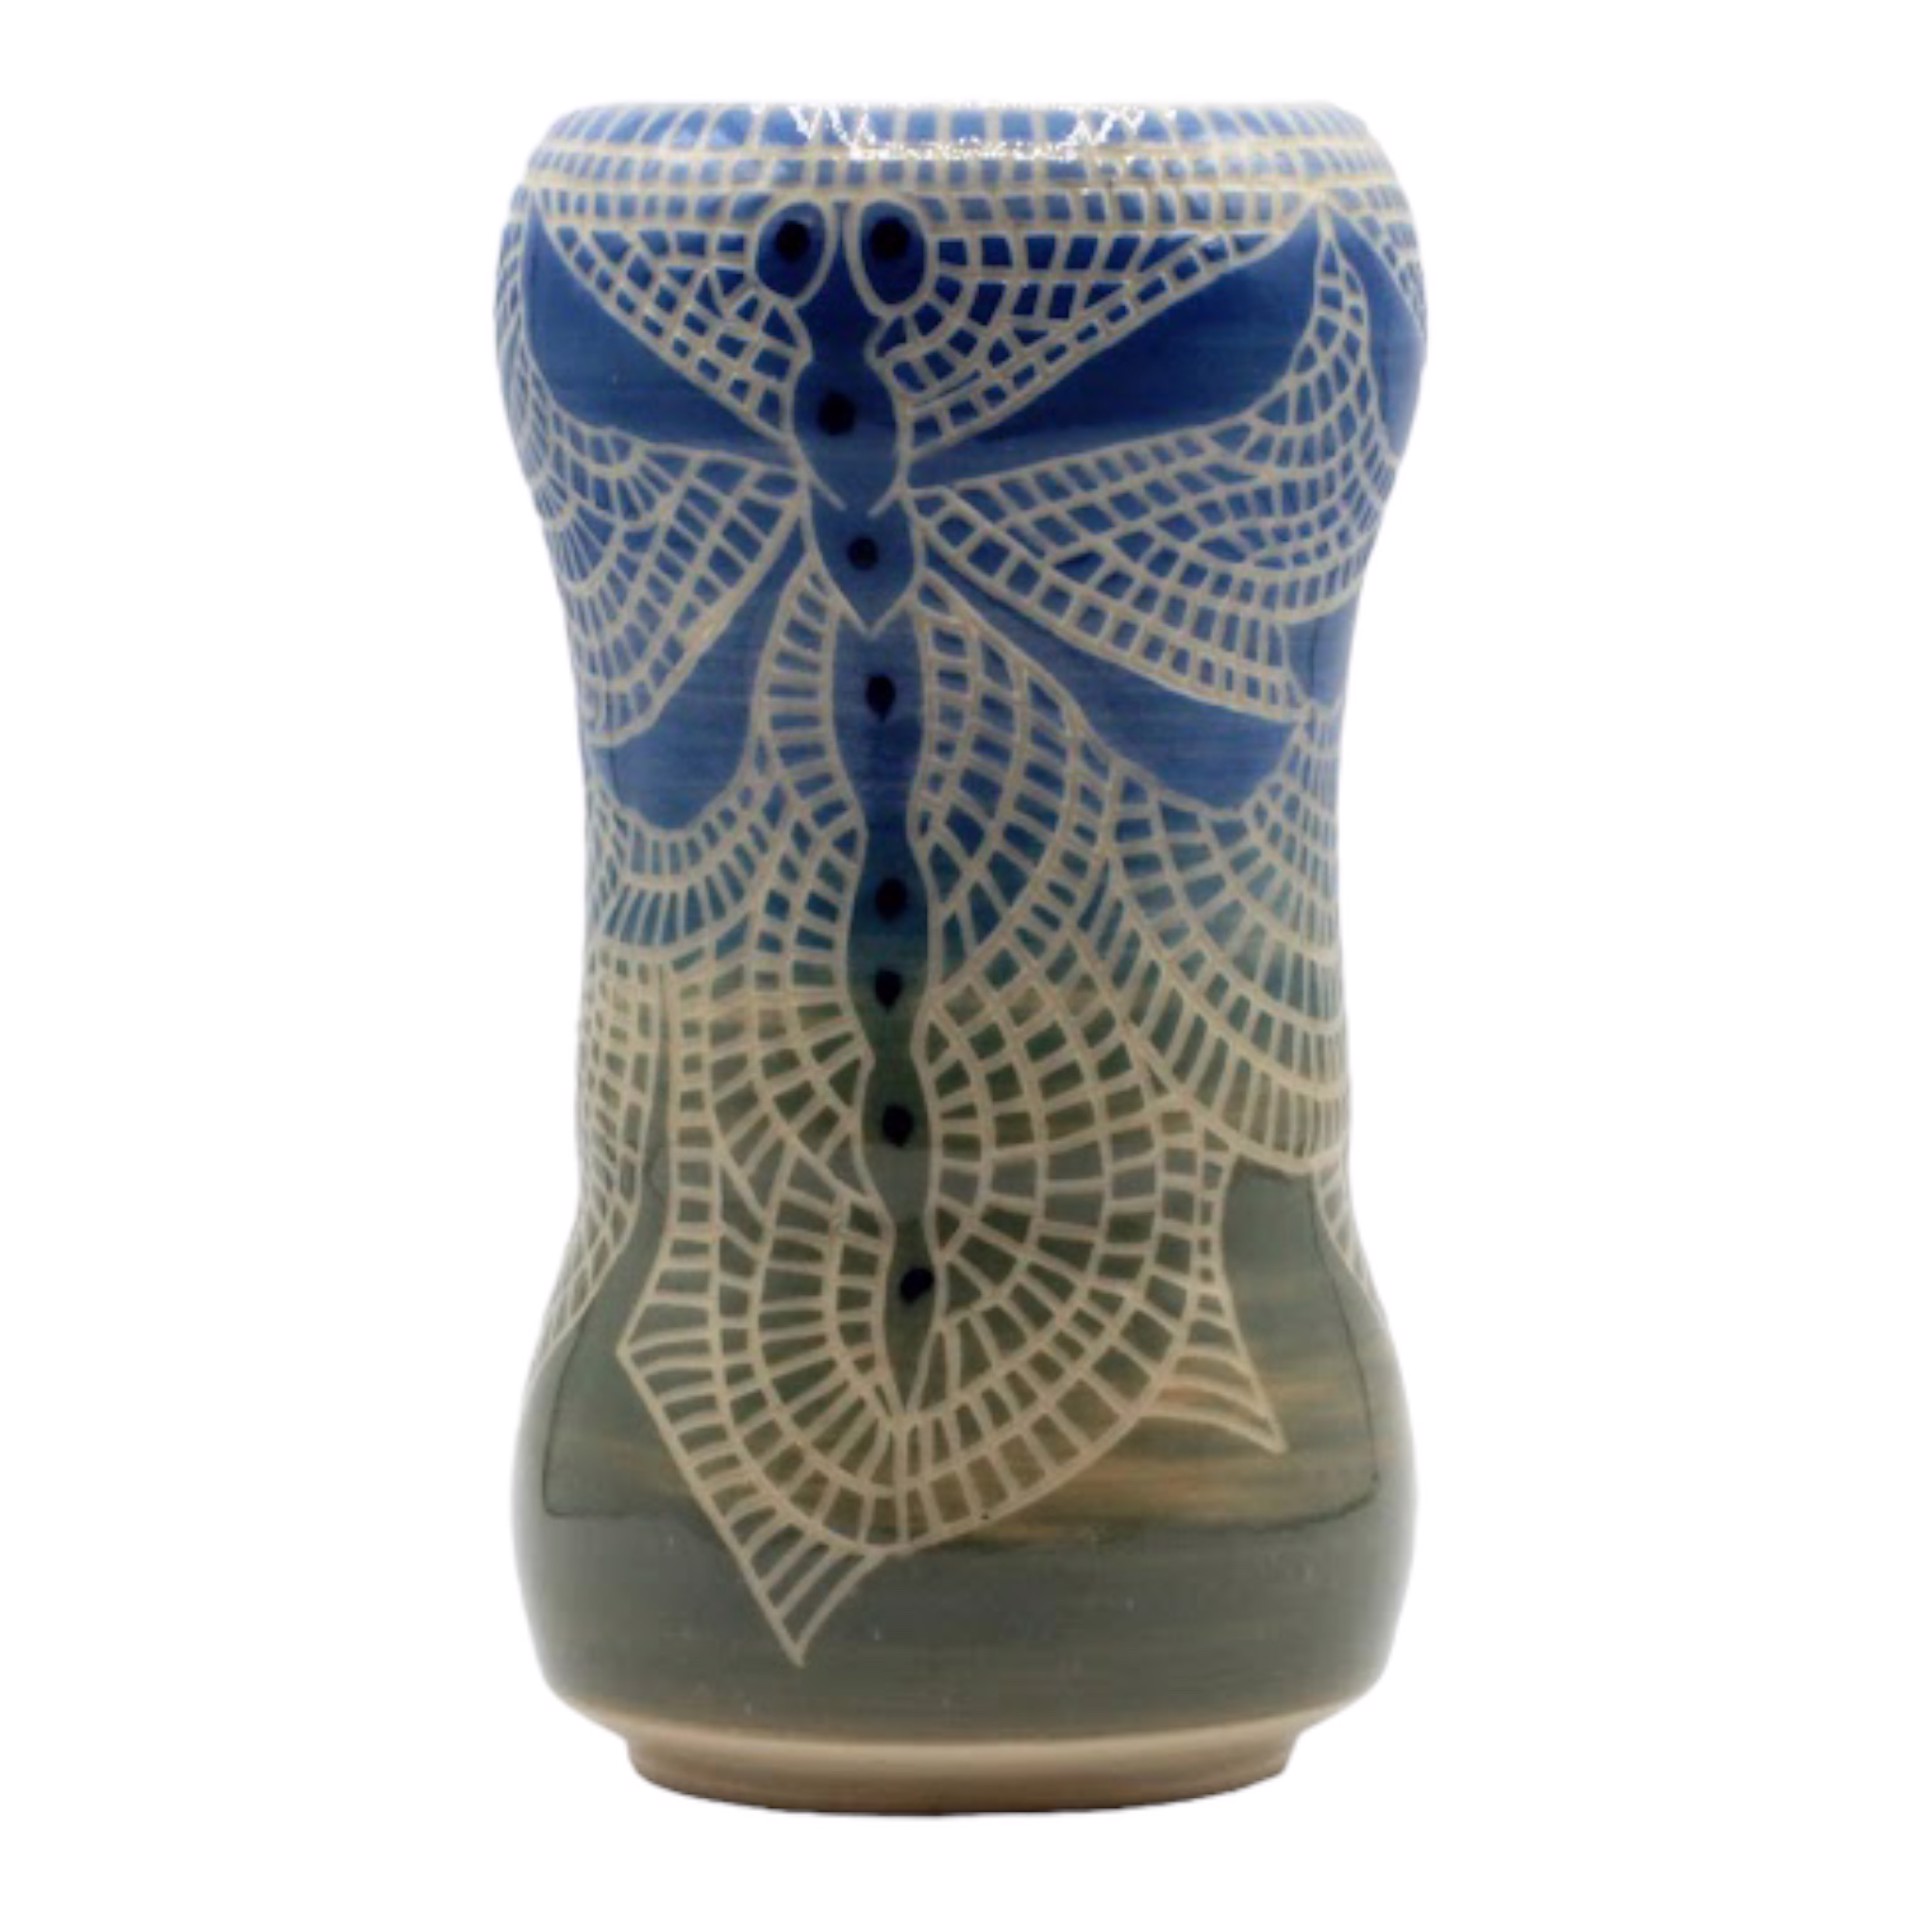 Dragonfly Vase - Large by Kelly Price